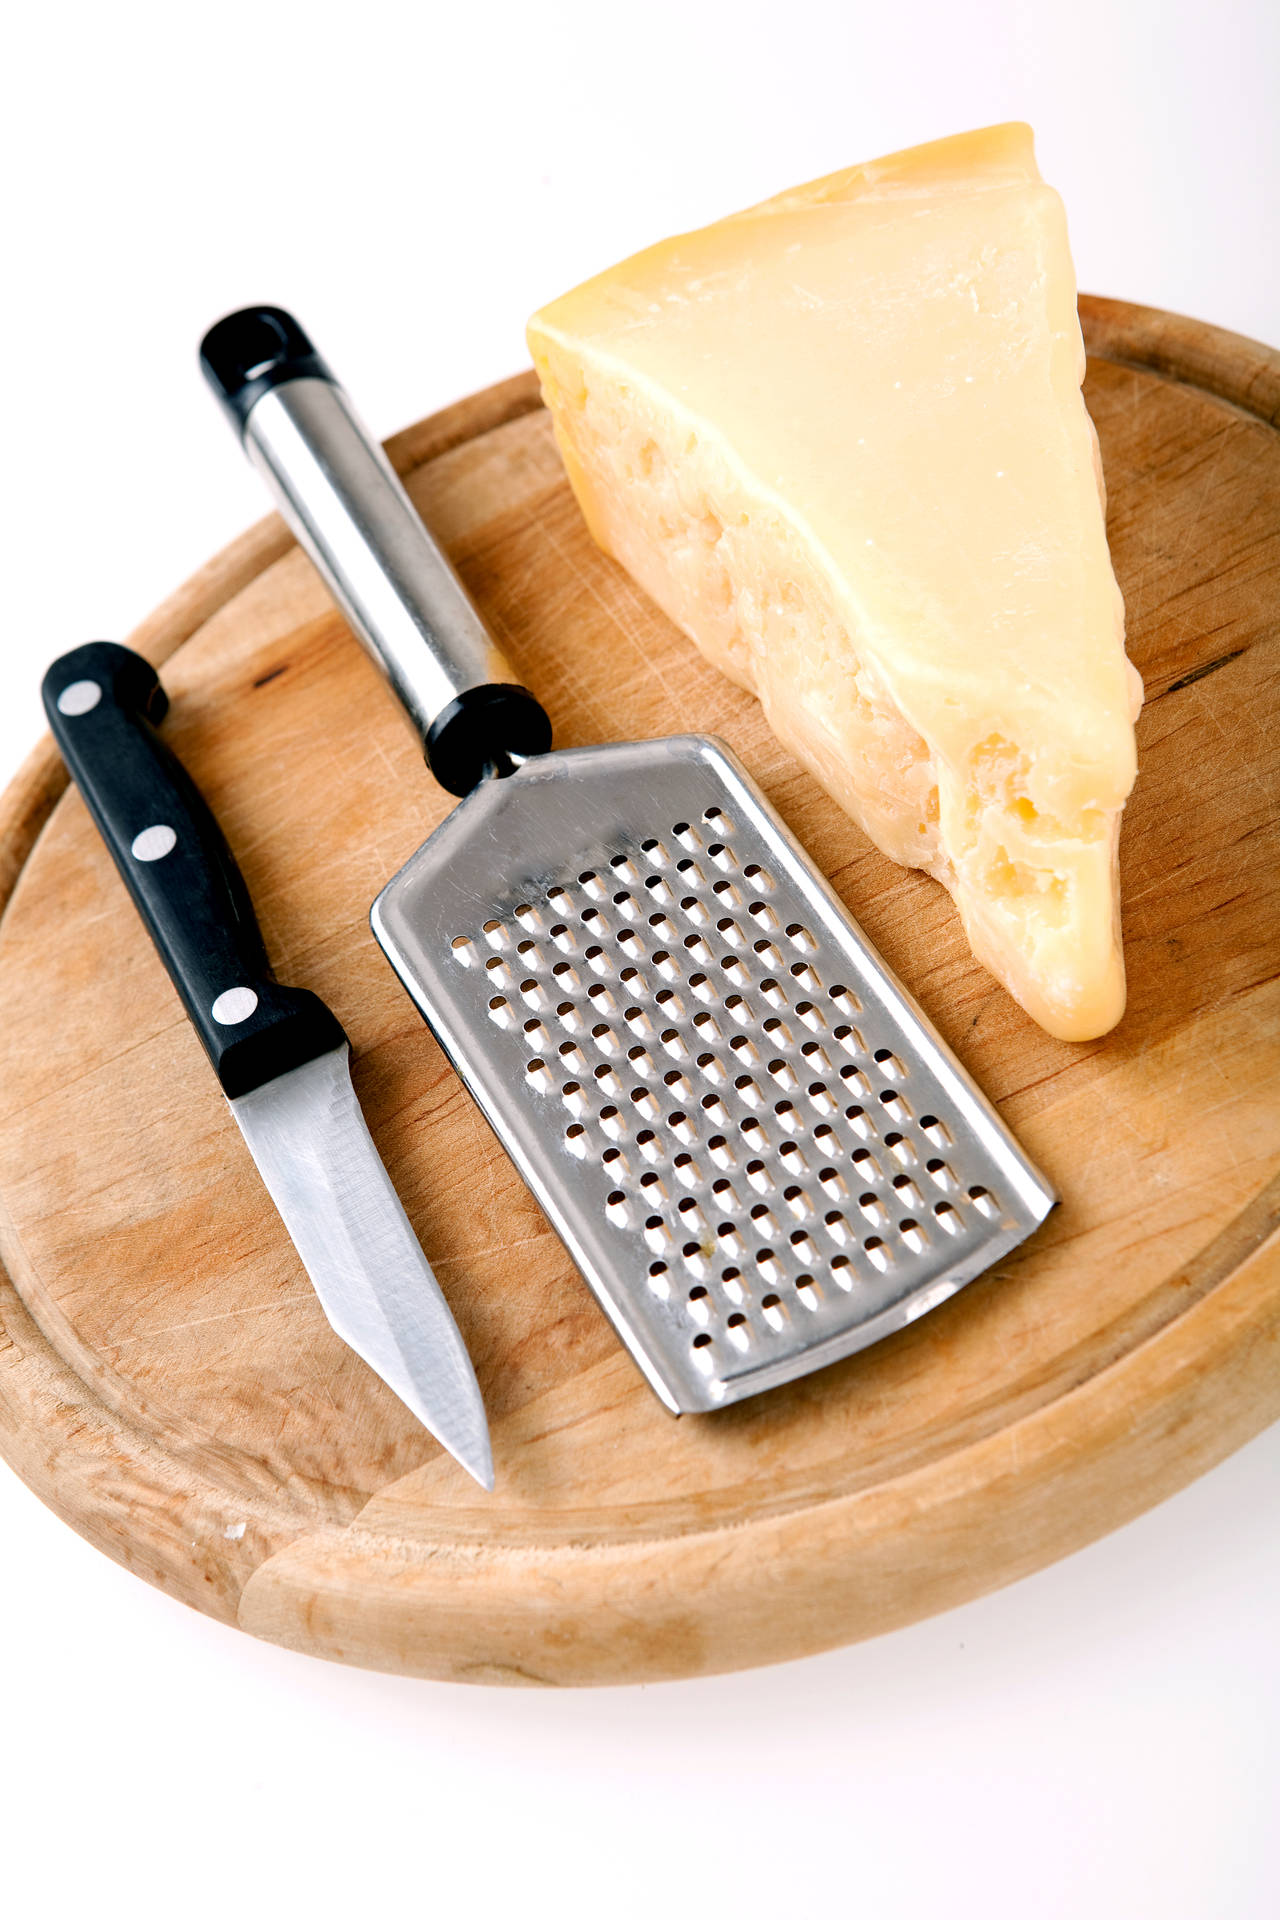 Cheese With Grater And Knife